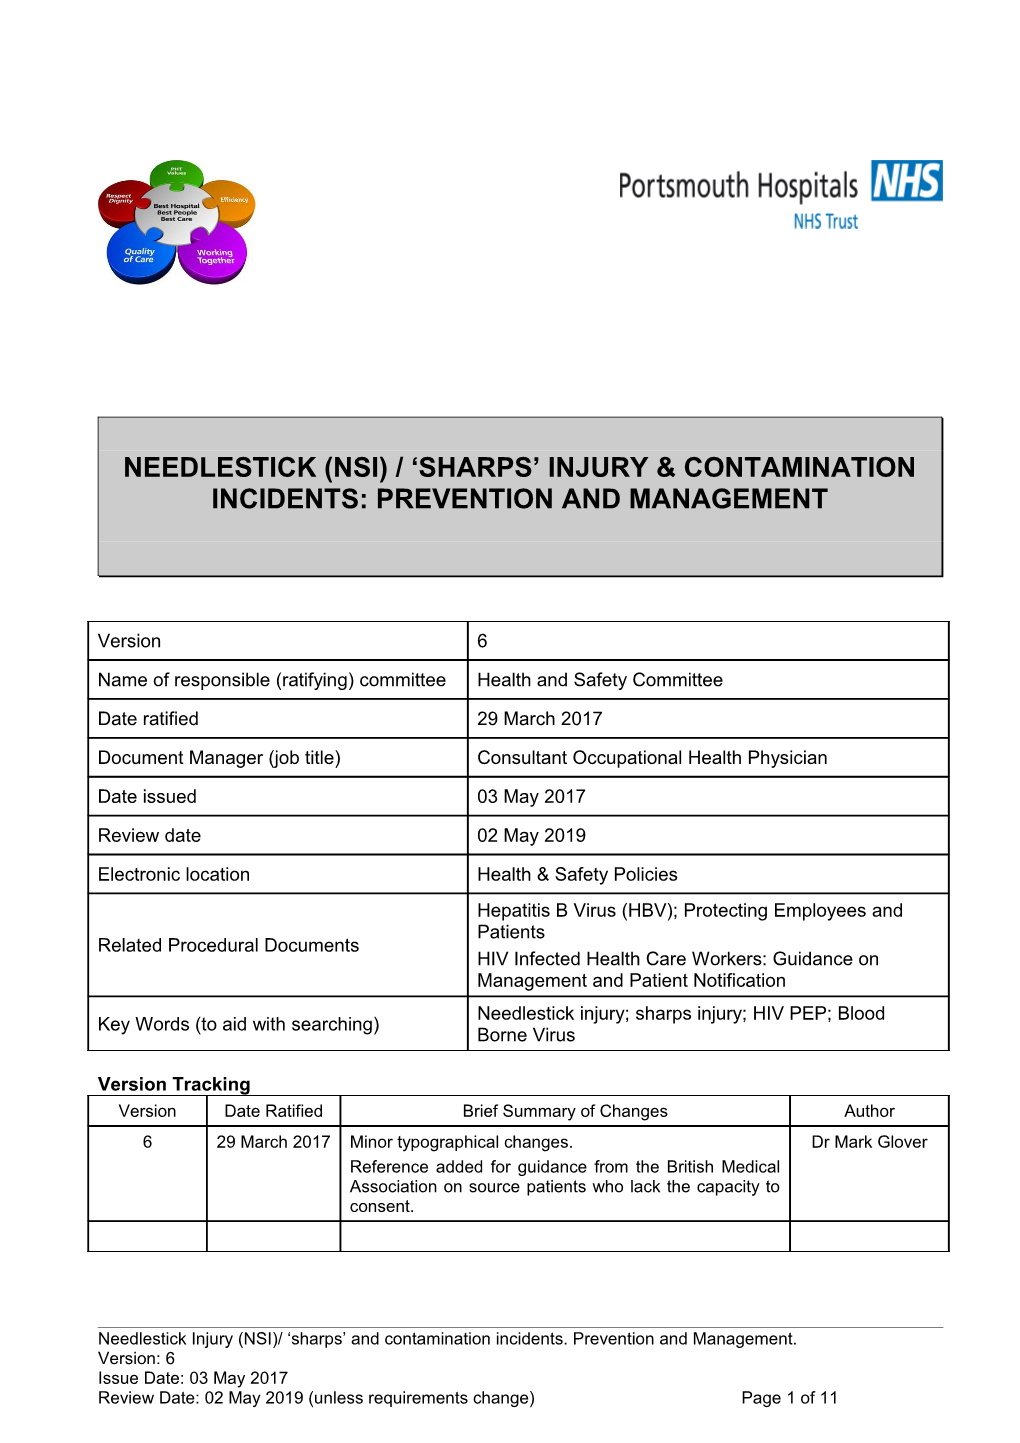 Needlestick (Nsi) / Sharps Injury & Contamination Incidents: Prevention and Management